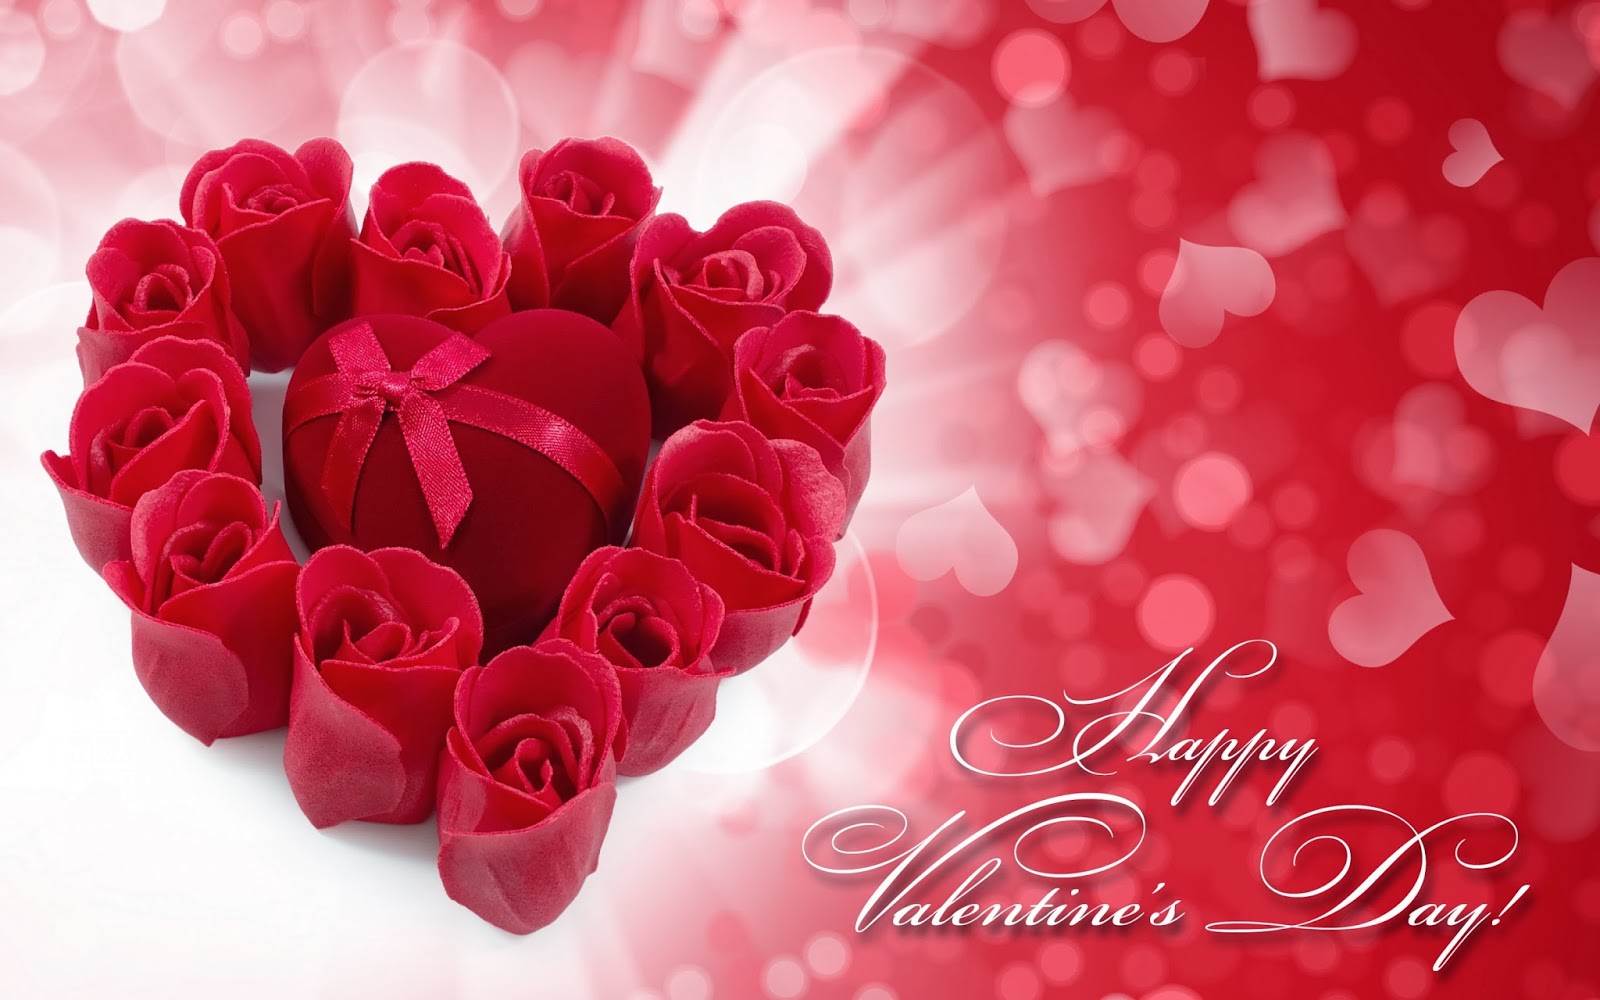 Valentines day 2016 love pictures and wallpapers